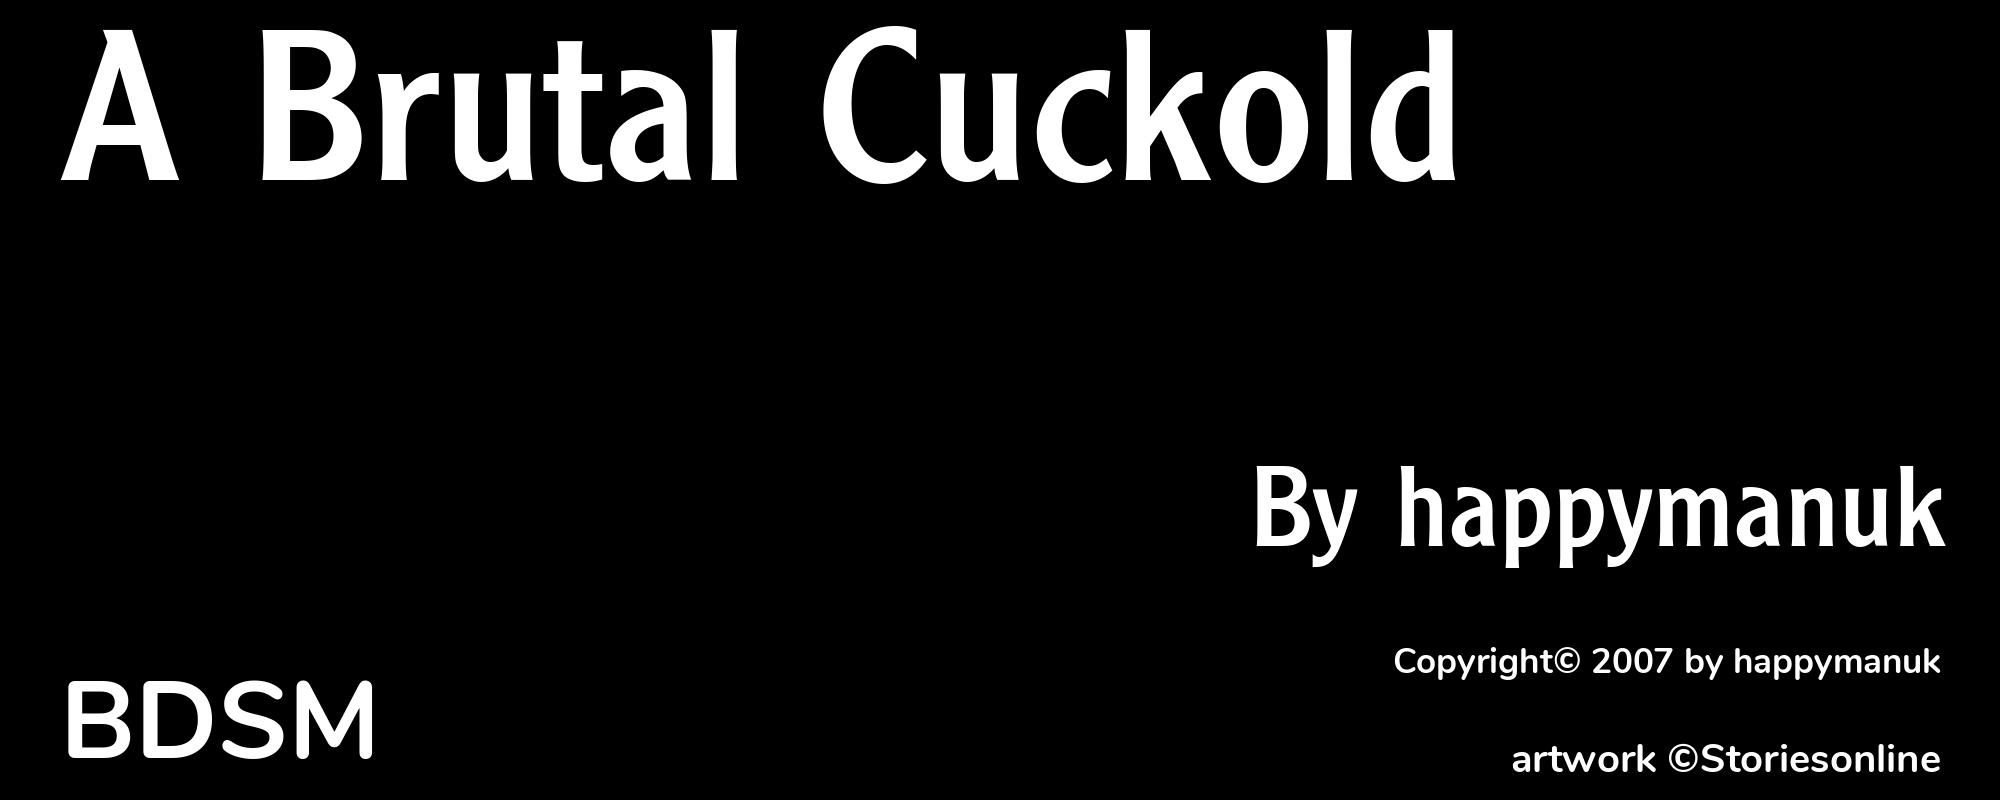 A Brutal Cuckold  - Cover